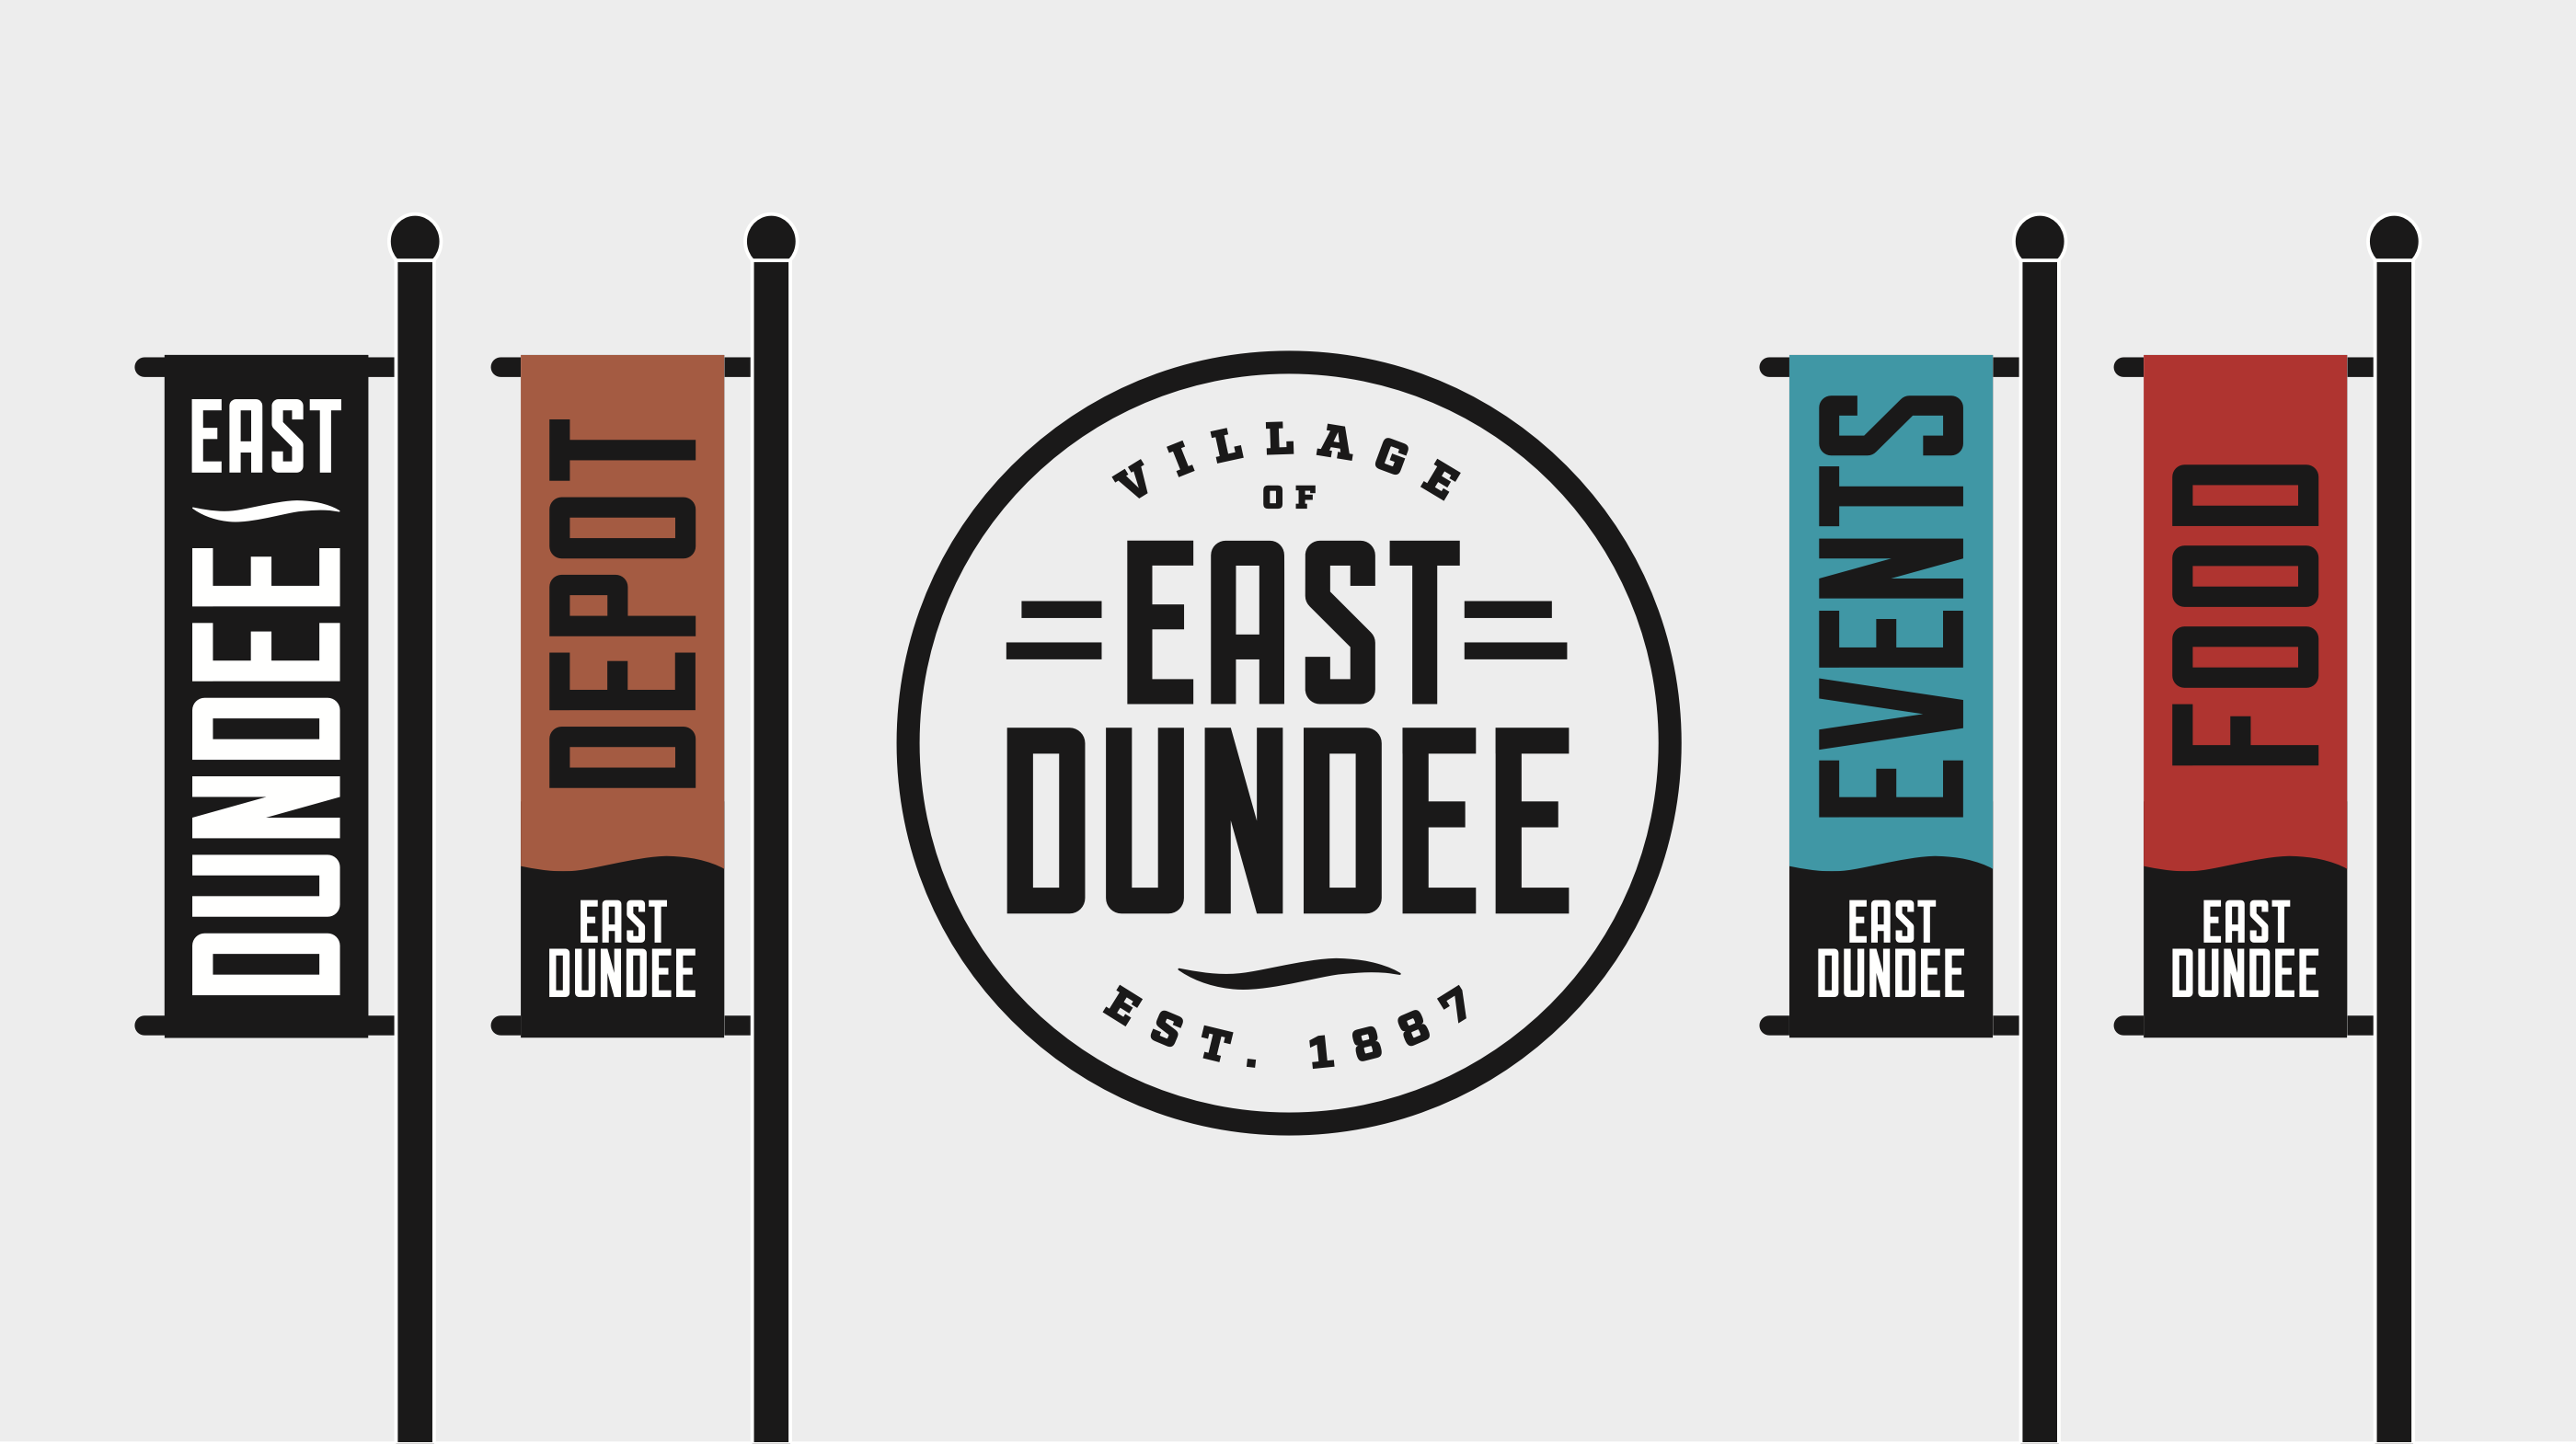 Illustration of East Dundee logo and street banners